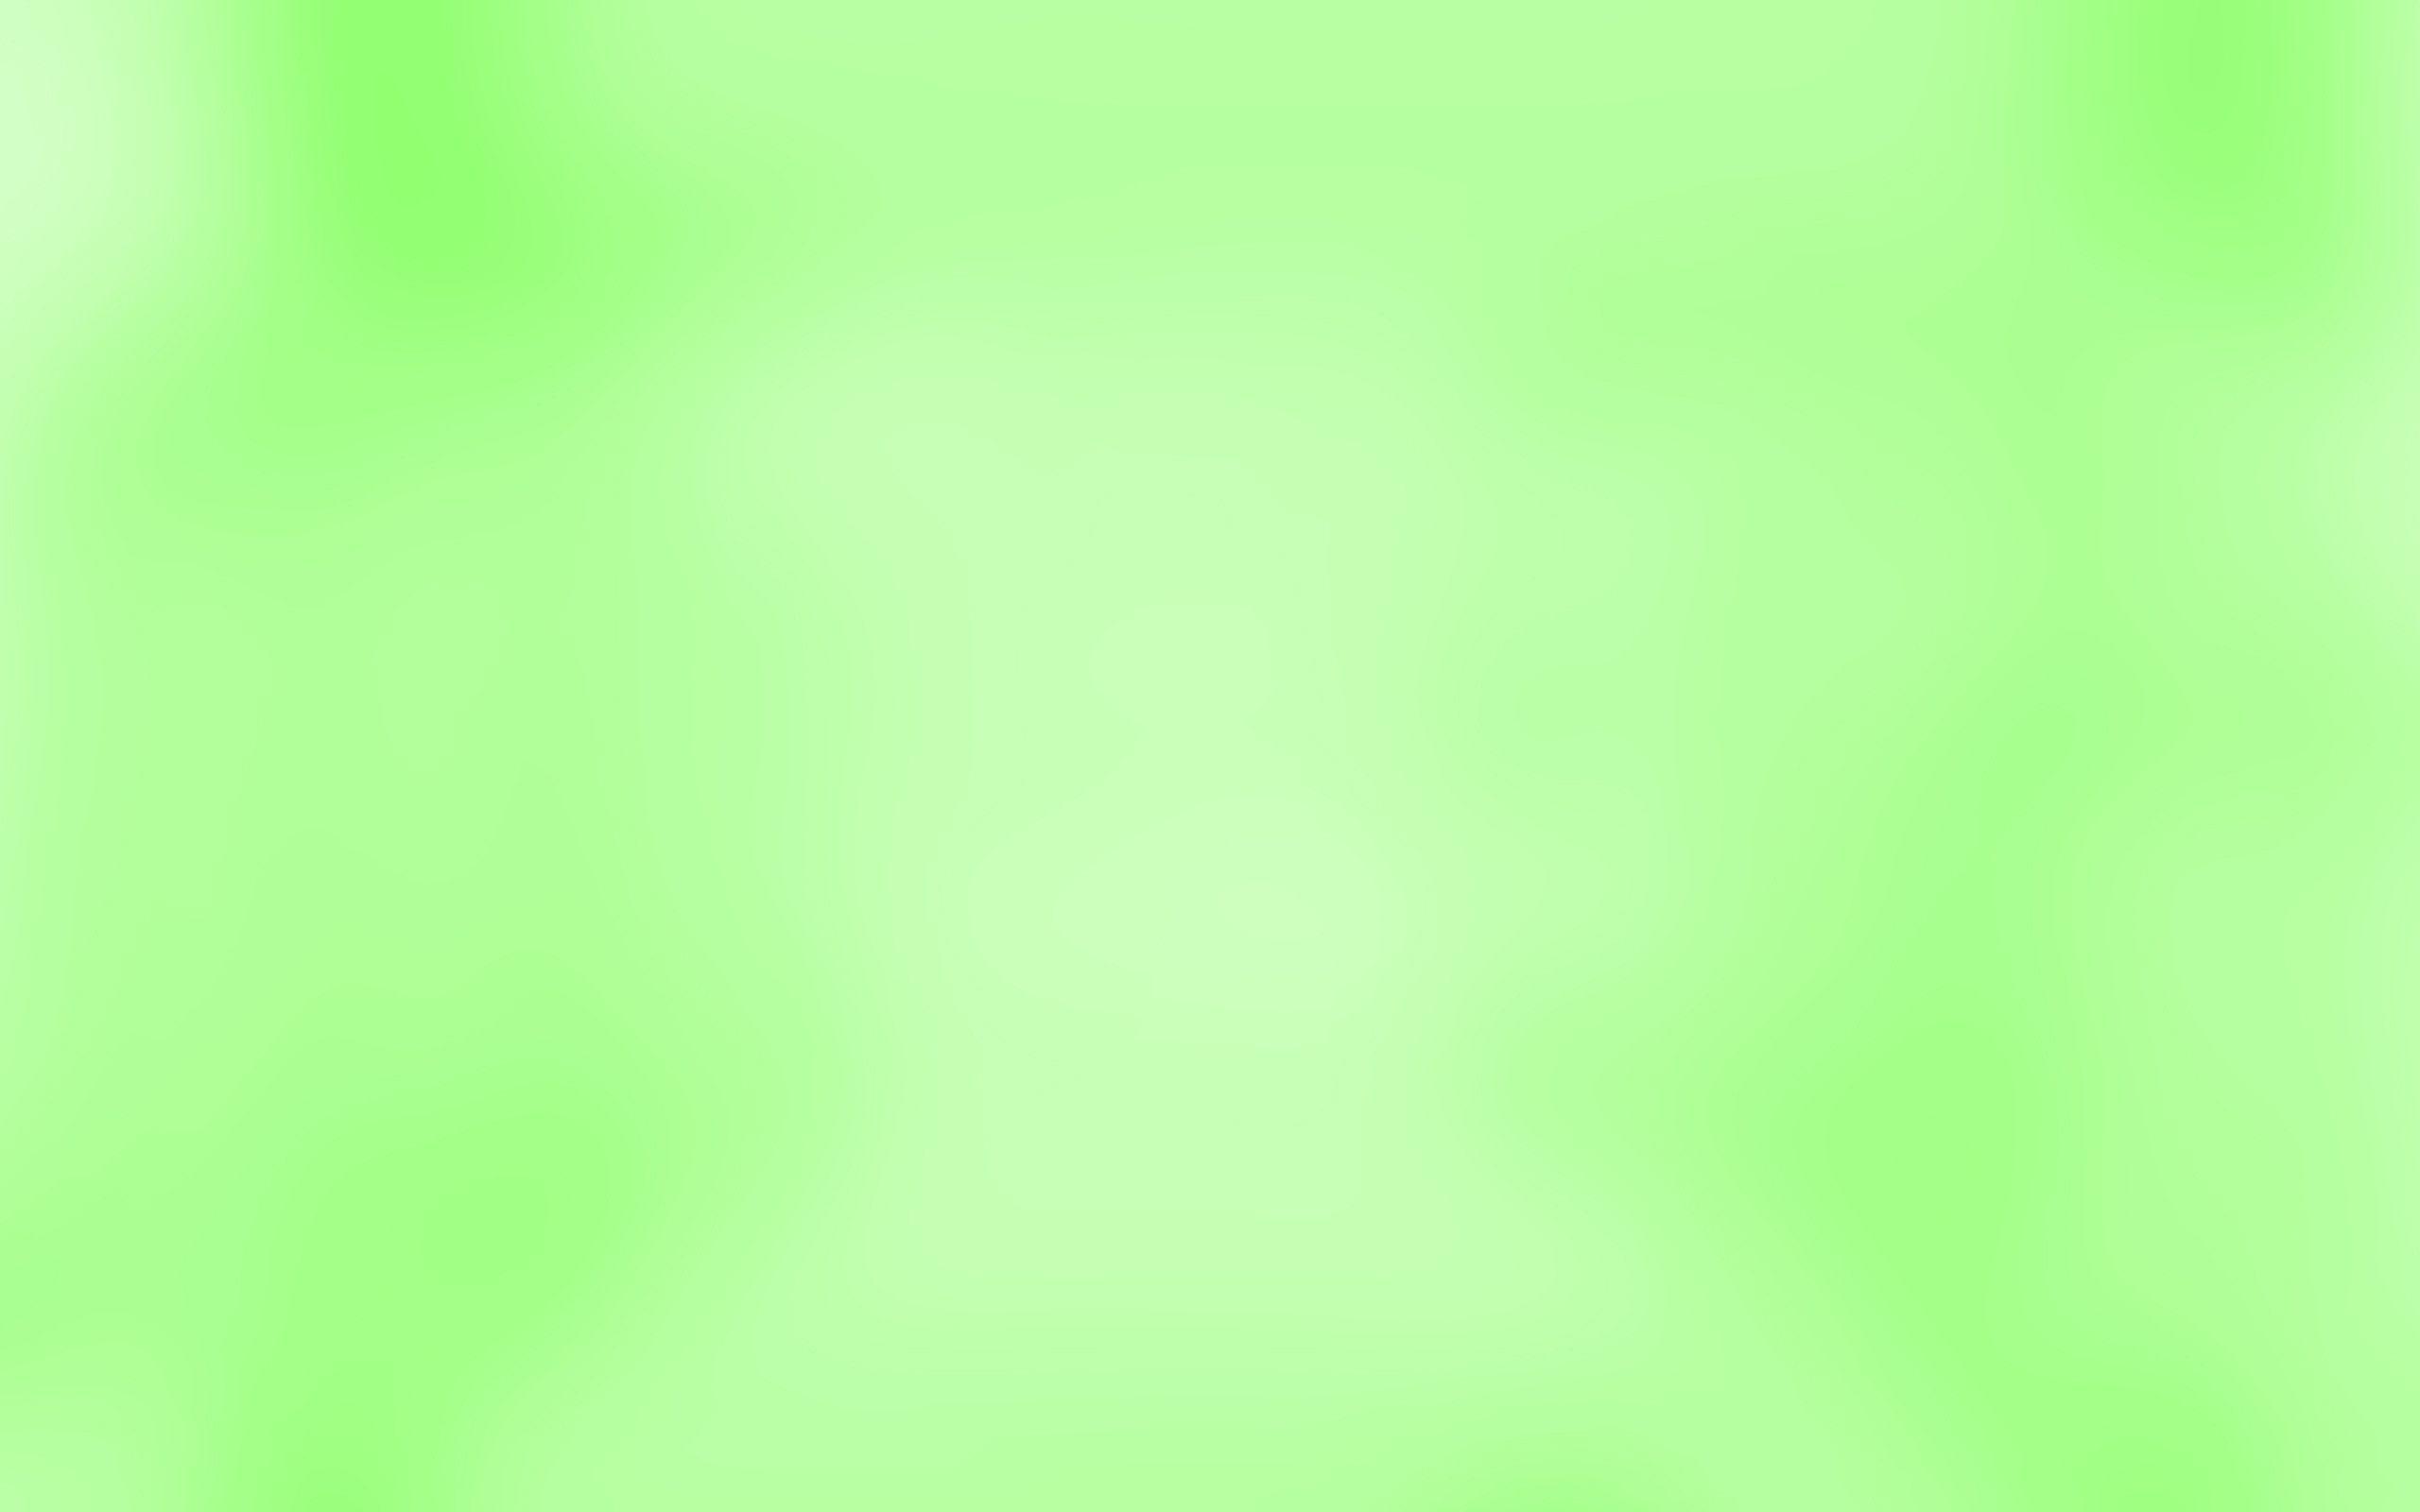 HD wallpaper: Abstract Graphic Design Lime Green, green and yellow digital  wallpaper | Wallpaper Flare